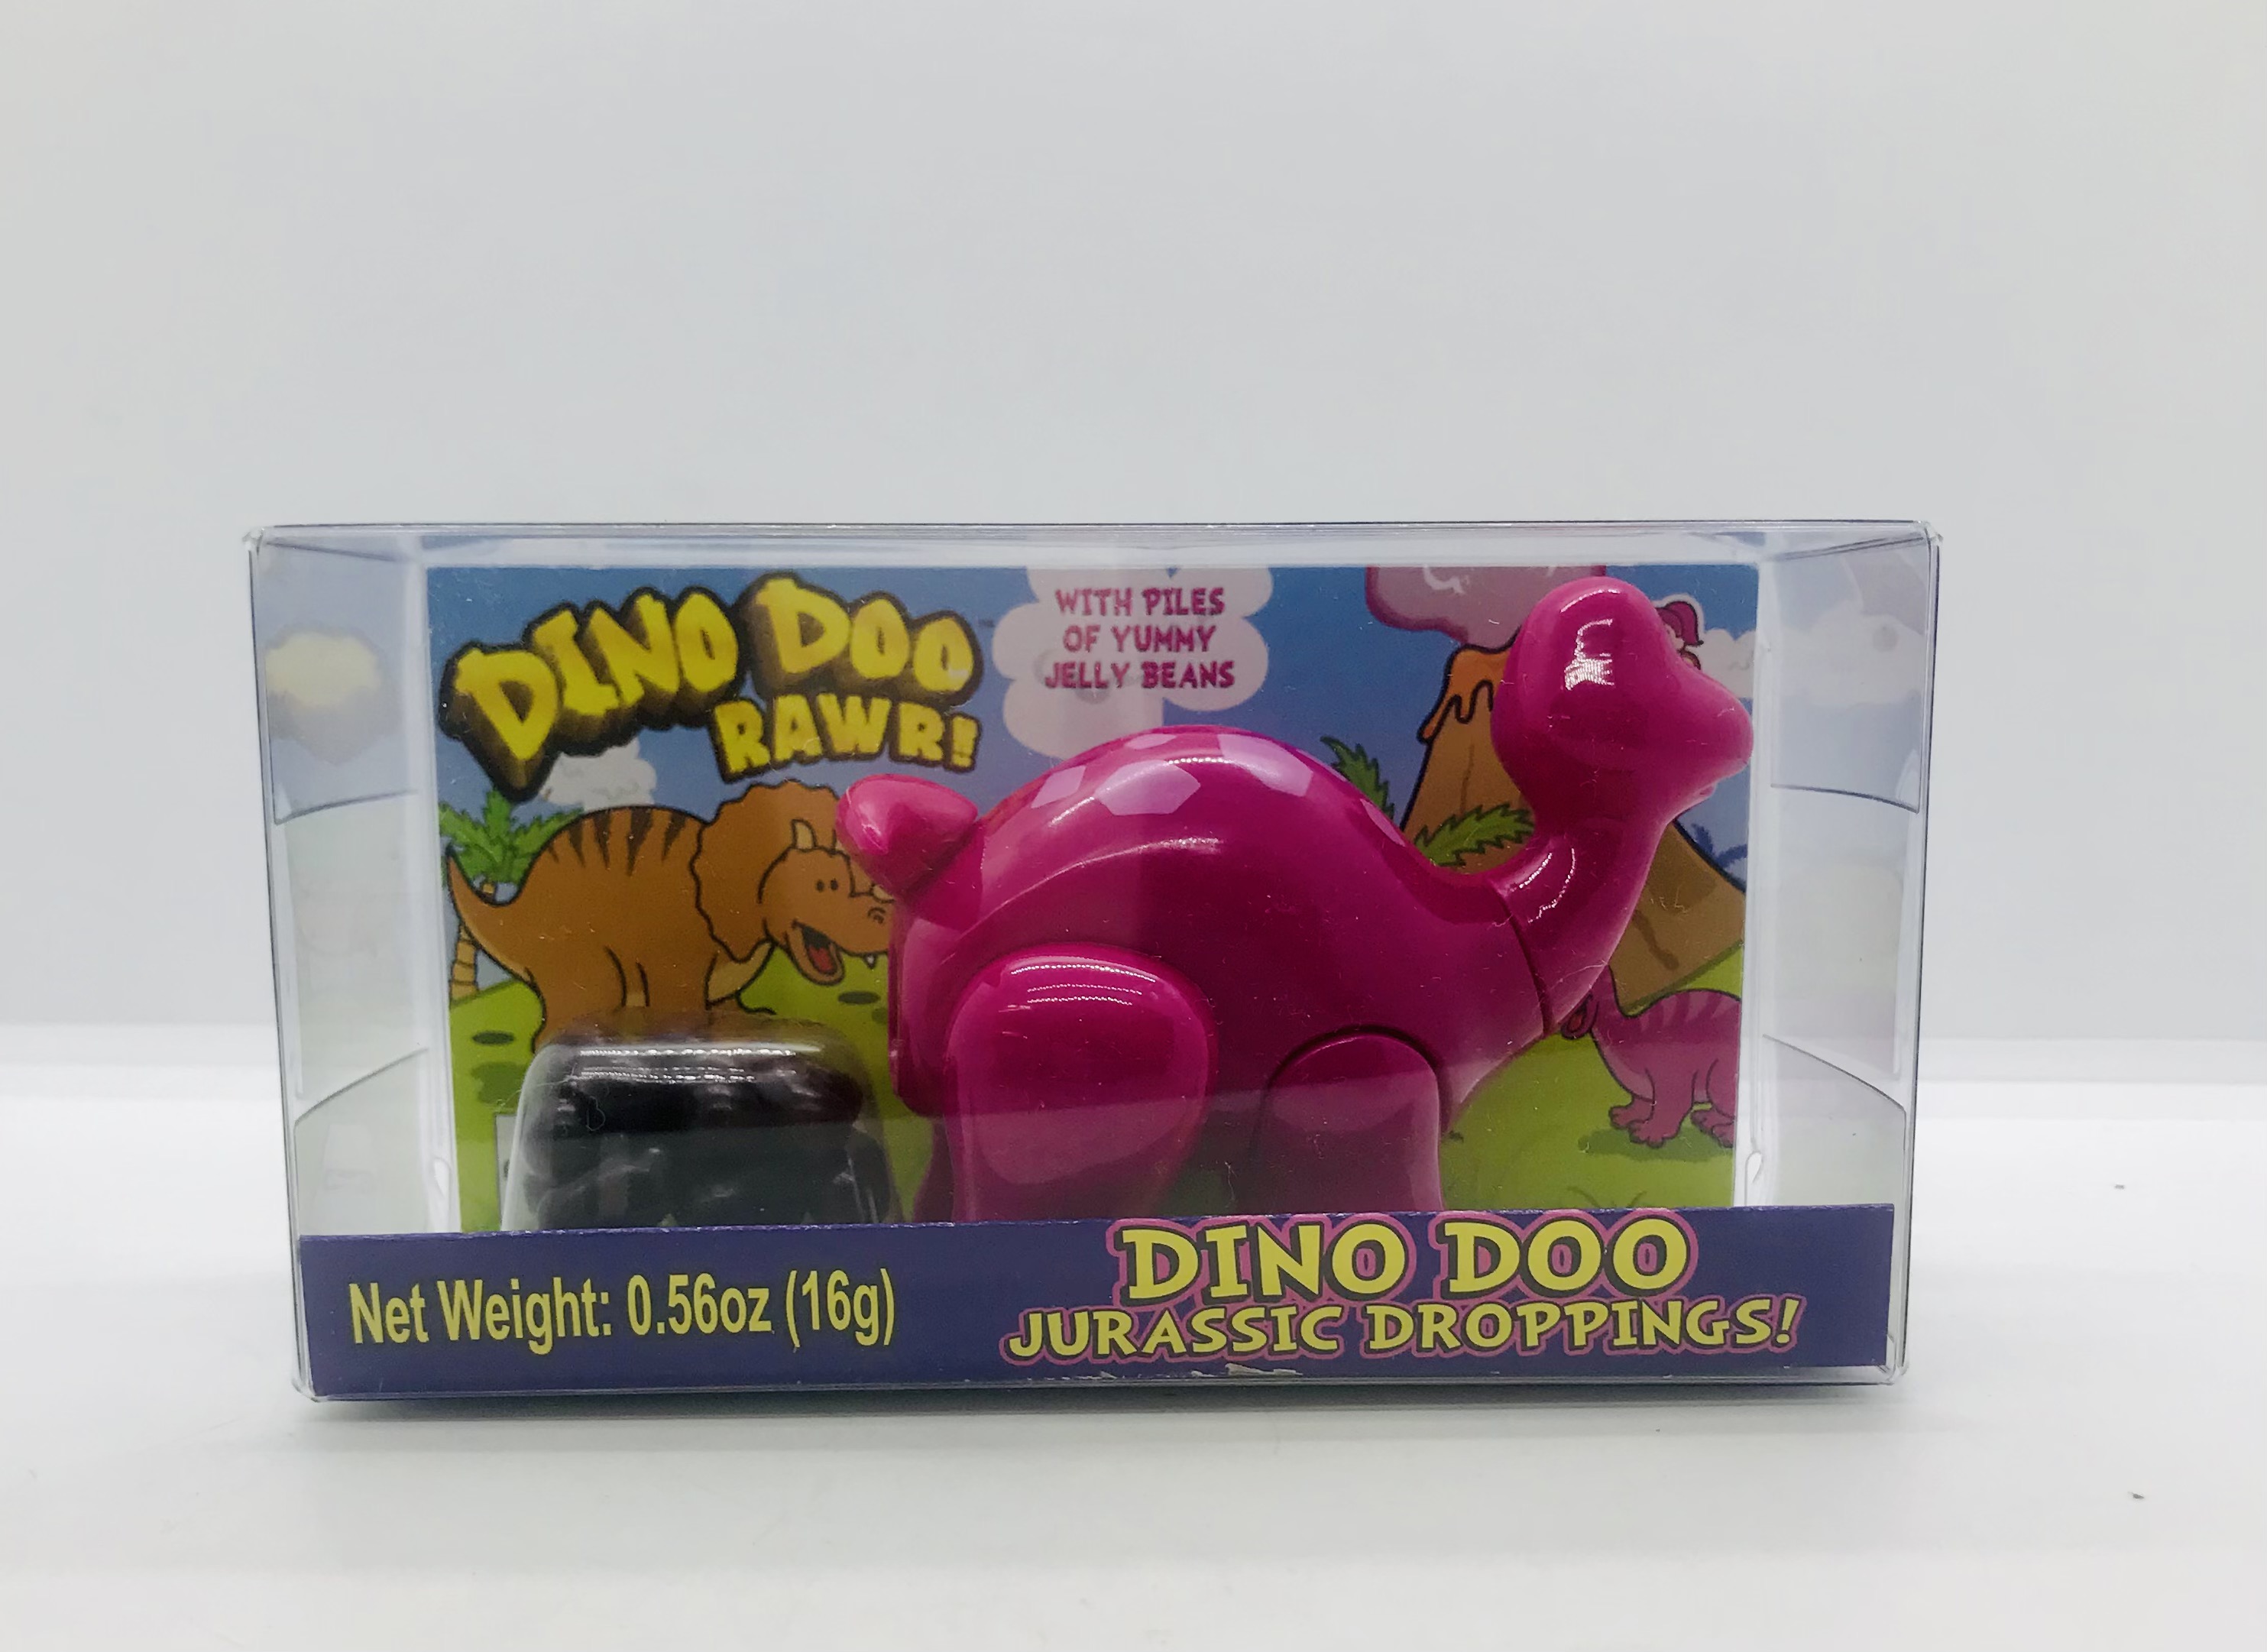 Dino Doo Jurassic Droppings 16g - Gala Apple Grocery and Produce